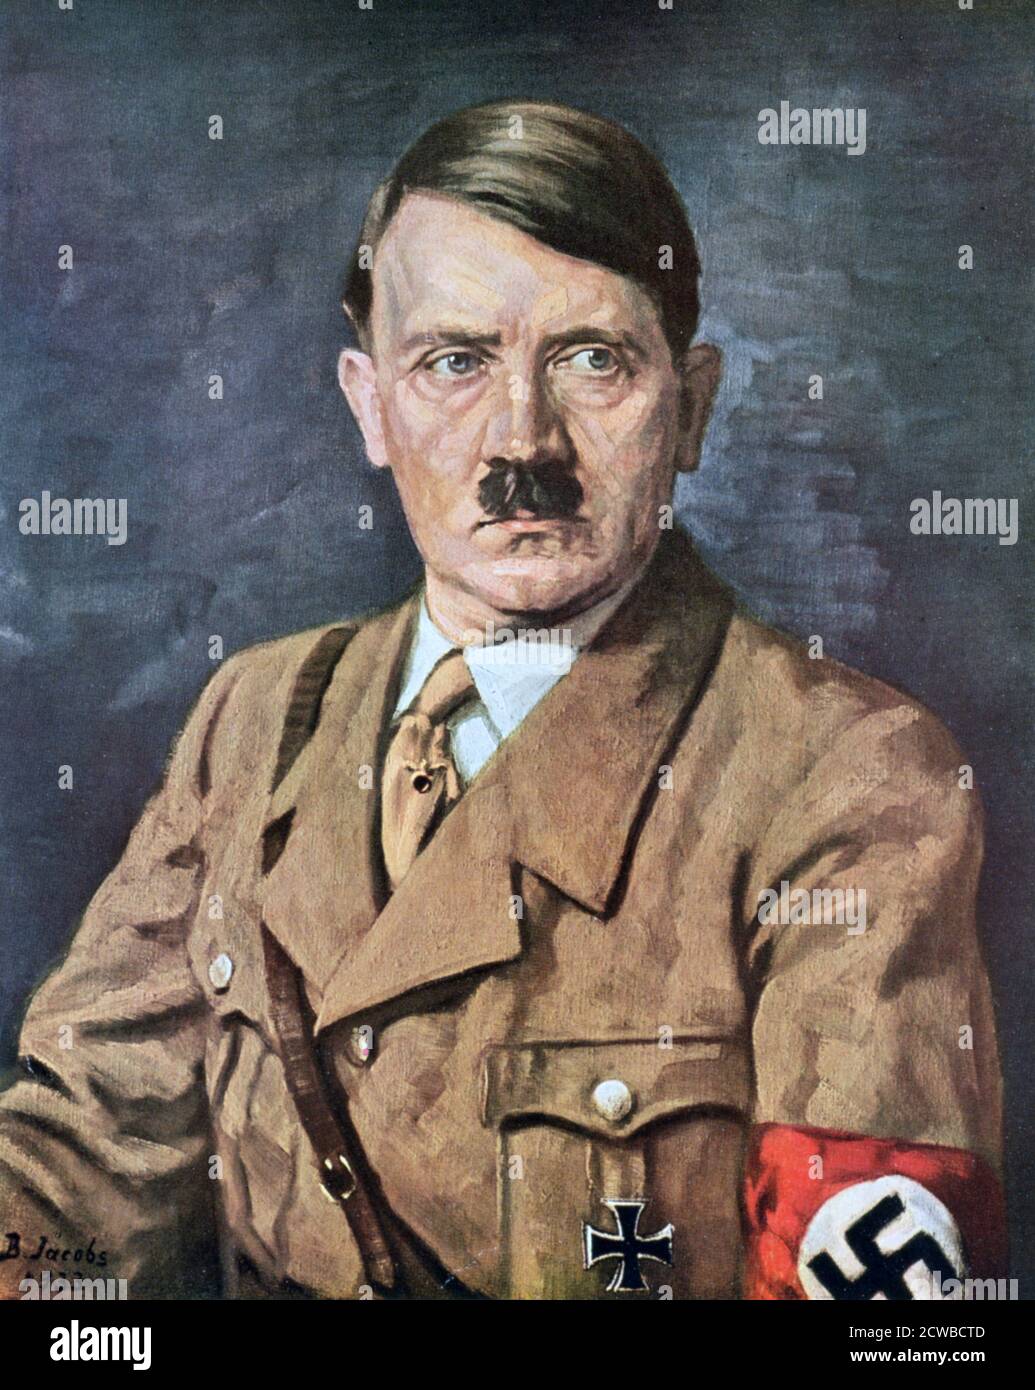 Adolf Hitler', 1933 by B von Jacobs. German Nazi leader. Adolf Hitler (1889-1945) became leader of the National Socialist German Workers (Nazi) party in 1921. After an unsuccessful coup attempt in Munich in 1923, Hitler was imprisoned. He set about pursuing power by democratic means. His nationalistic and anti-semitic message quickly gained support after Germany was humiliated by defeat in World War I and the harsh terms of the Treaty of Versailles and, from the late 1920s, suffering from economic collapse. Hitler came to power in 1933, and persuaded the Reichstag (parliament) to grant him dic Stock Photo